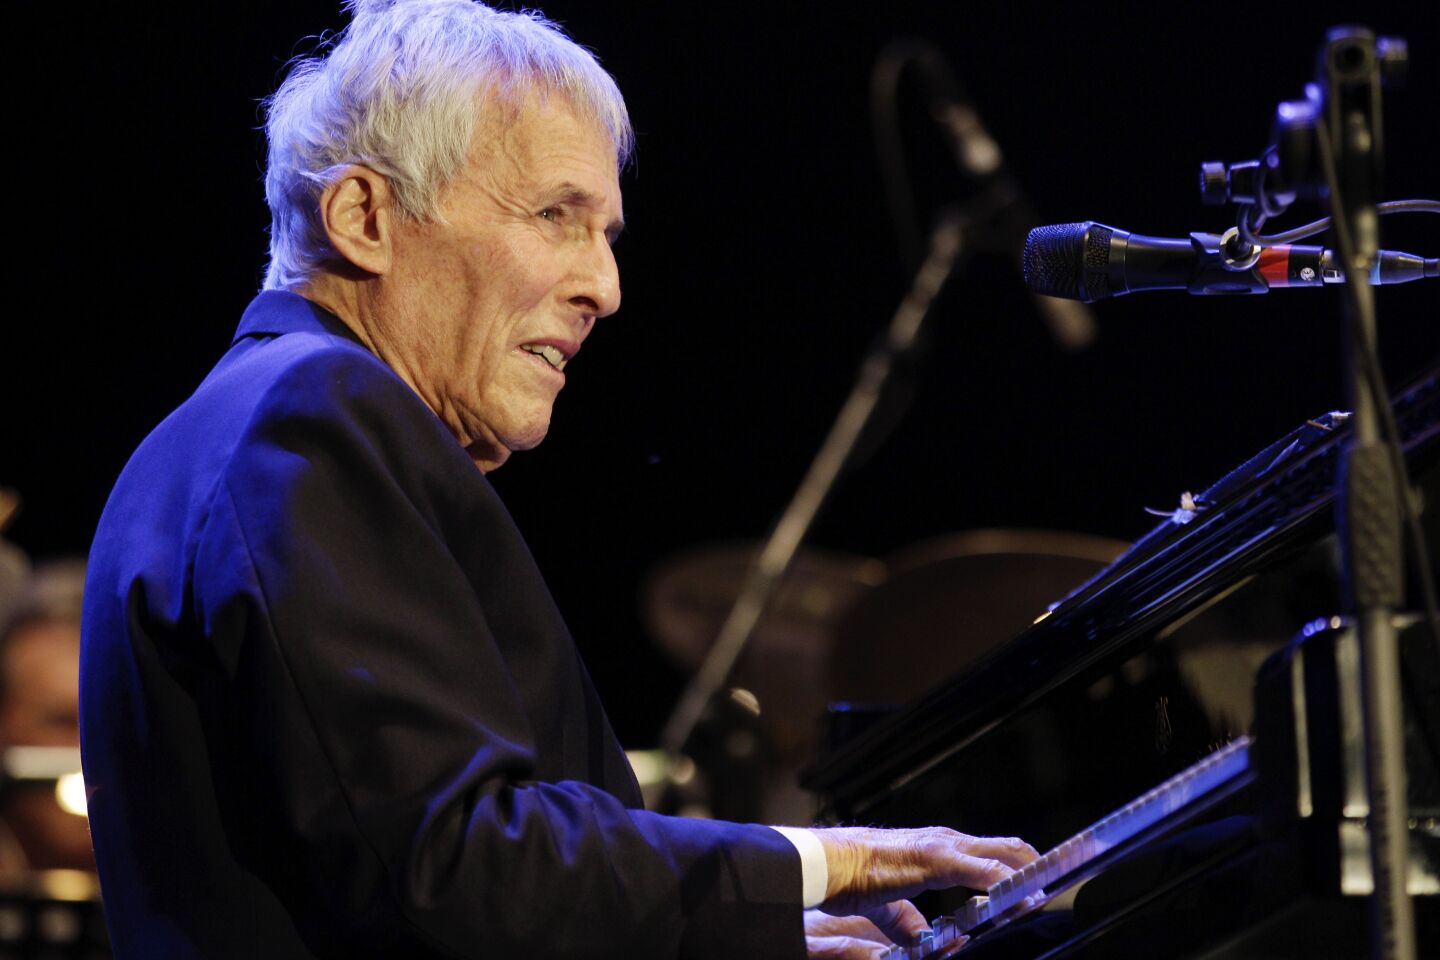 Burt Bacharach onstage playing the piano